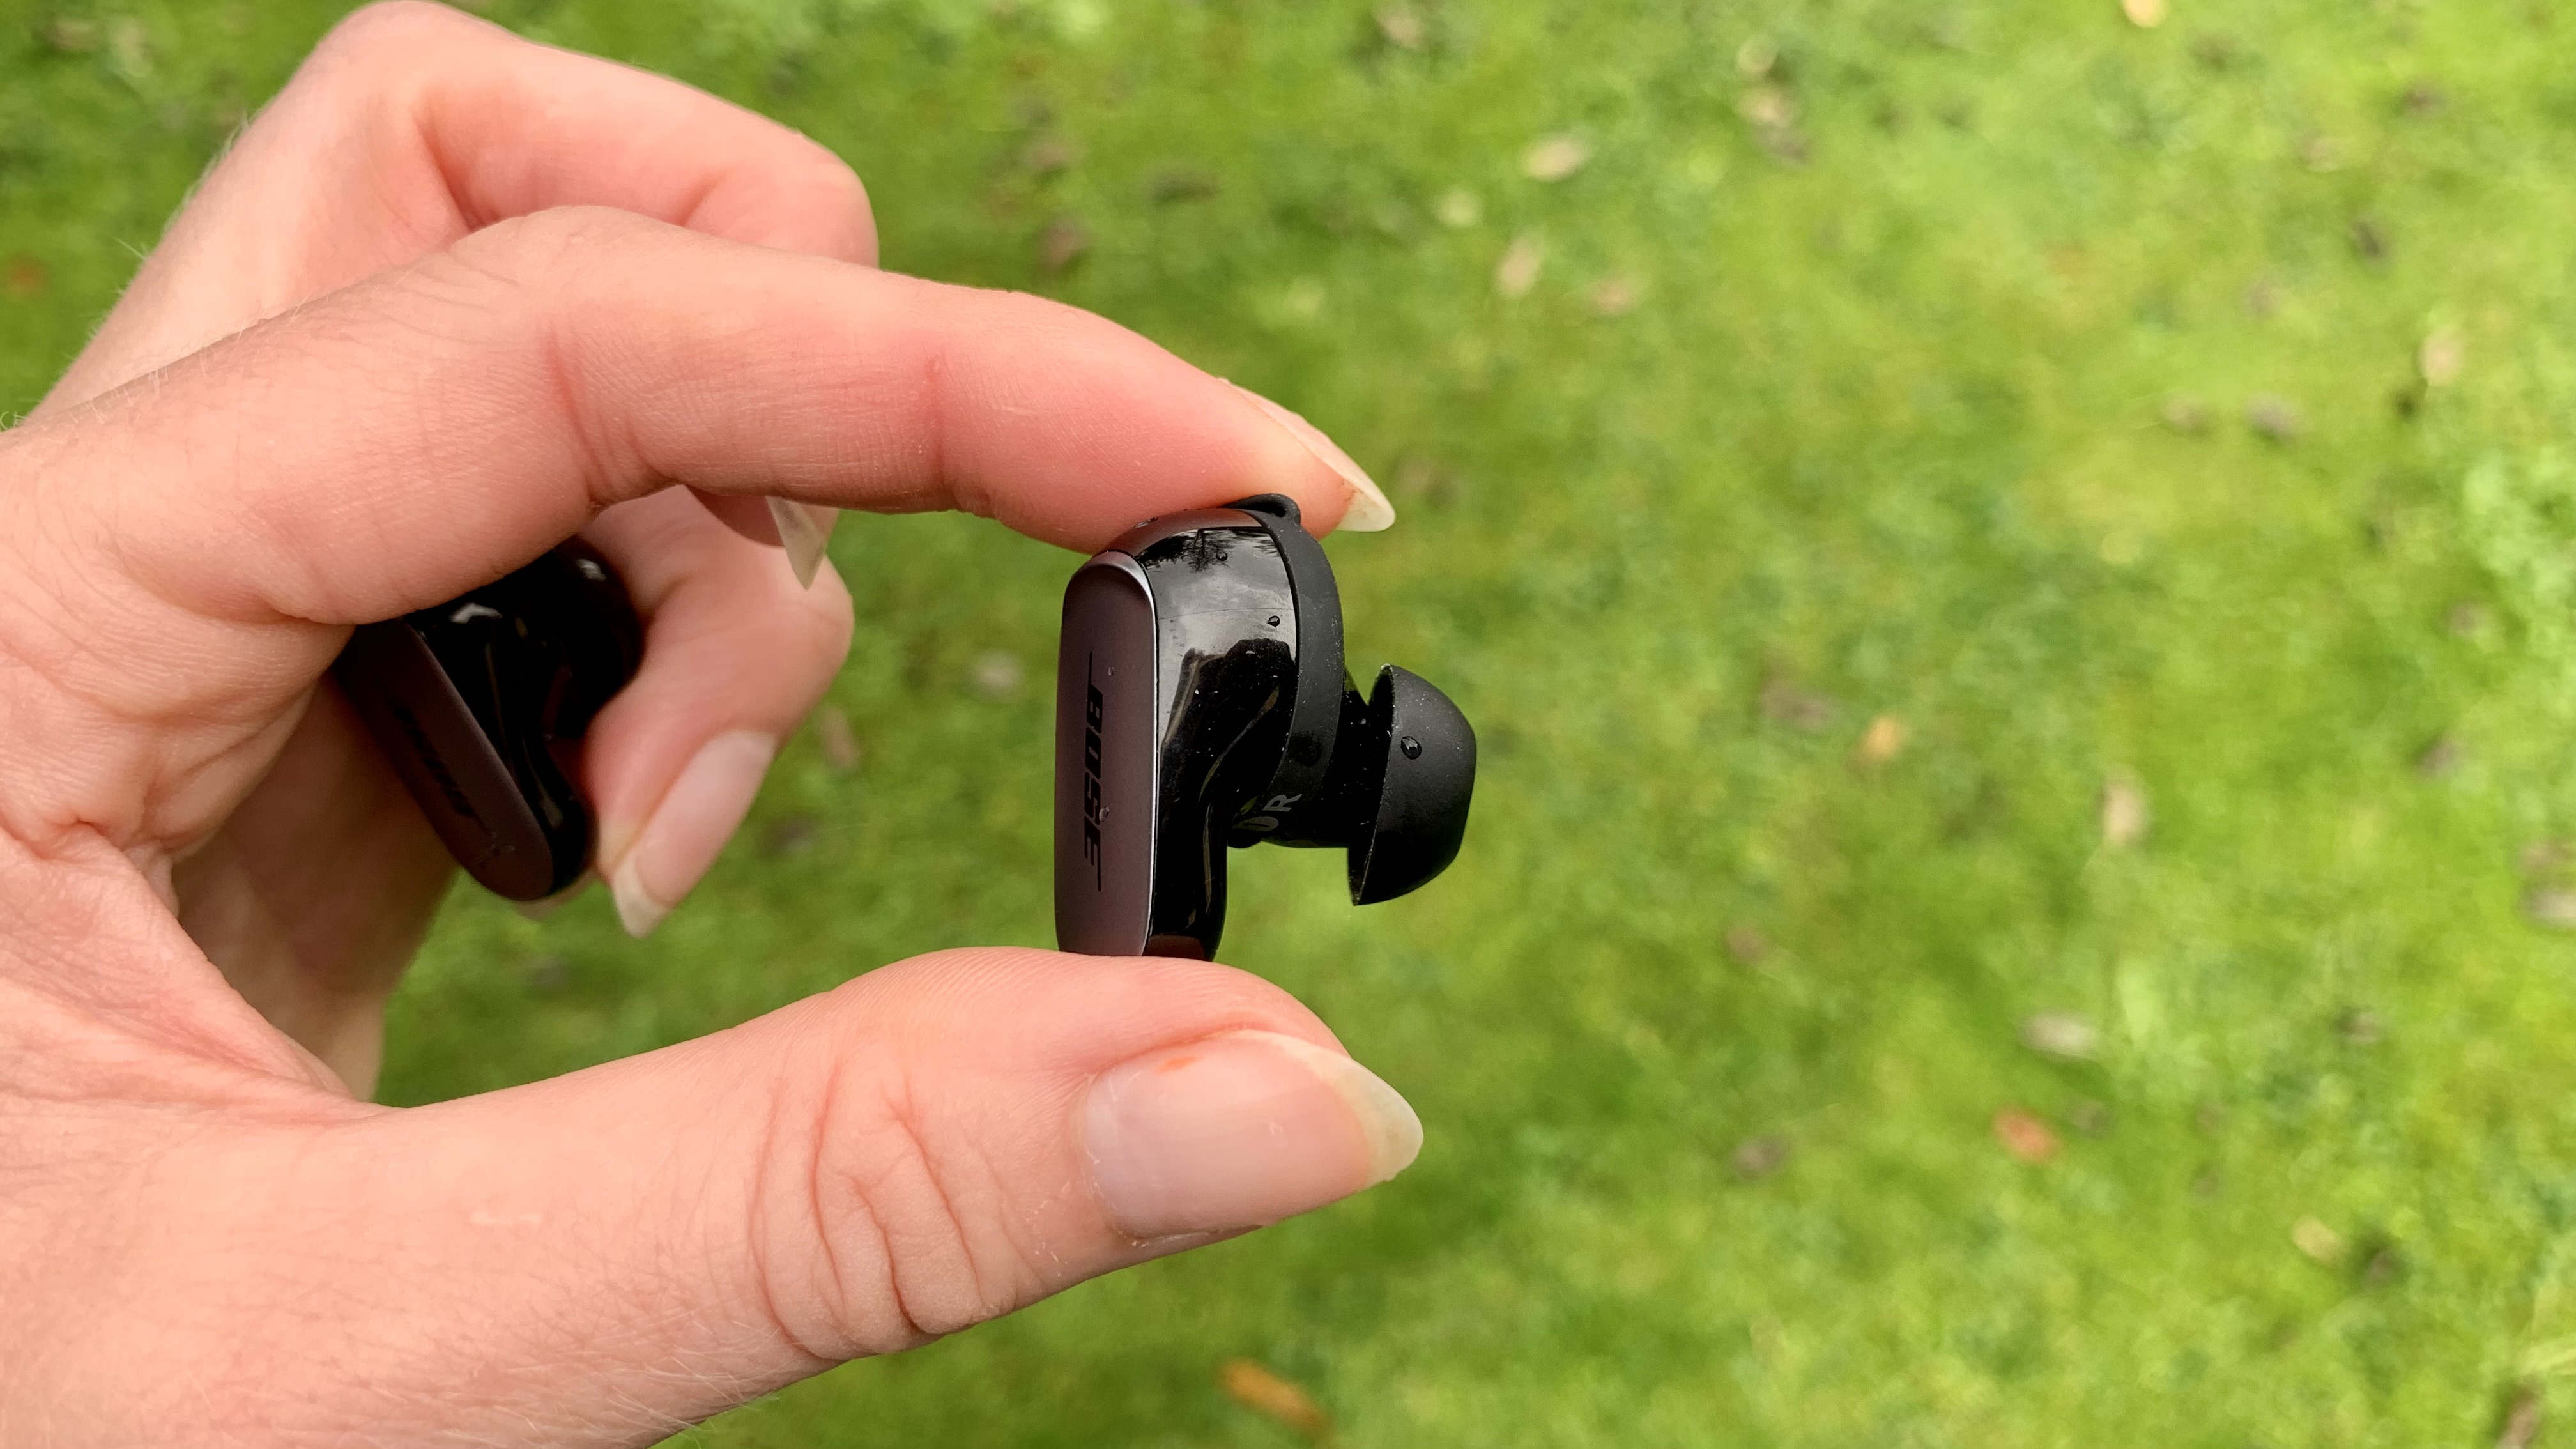 Bose QuietComfort Ultra Earbud held in a hand, on grassy background